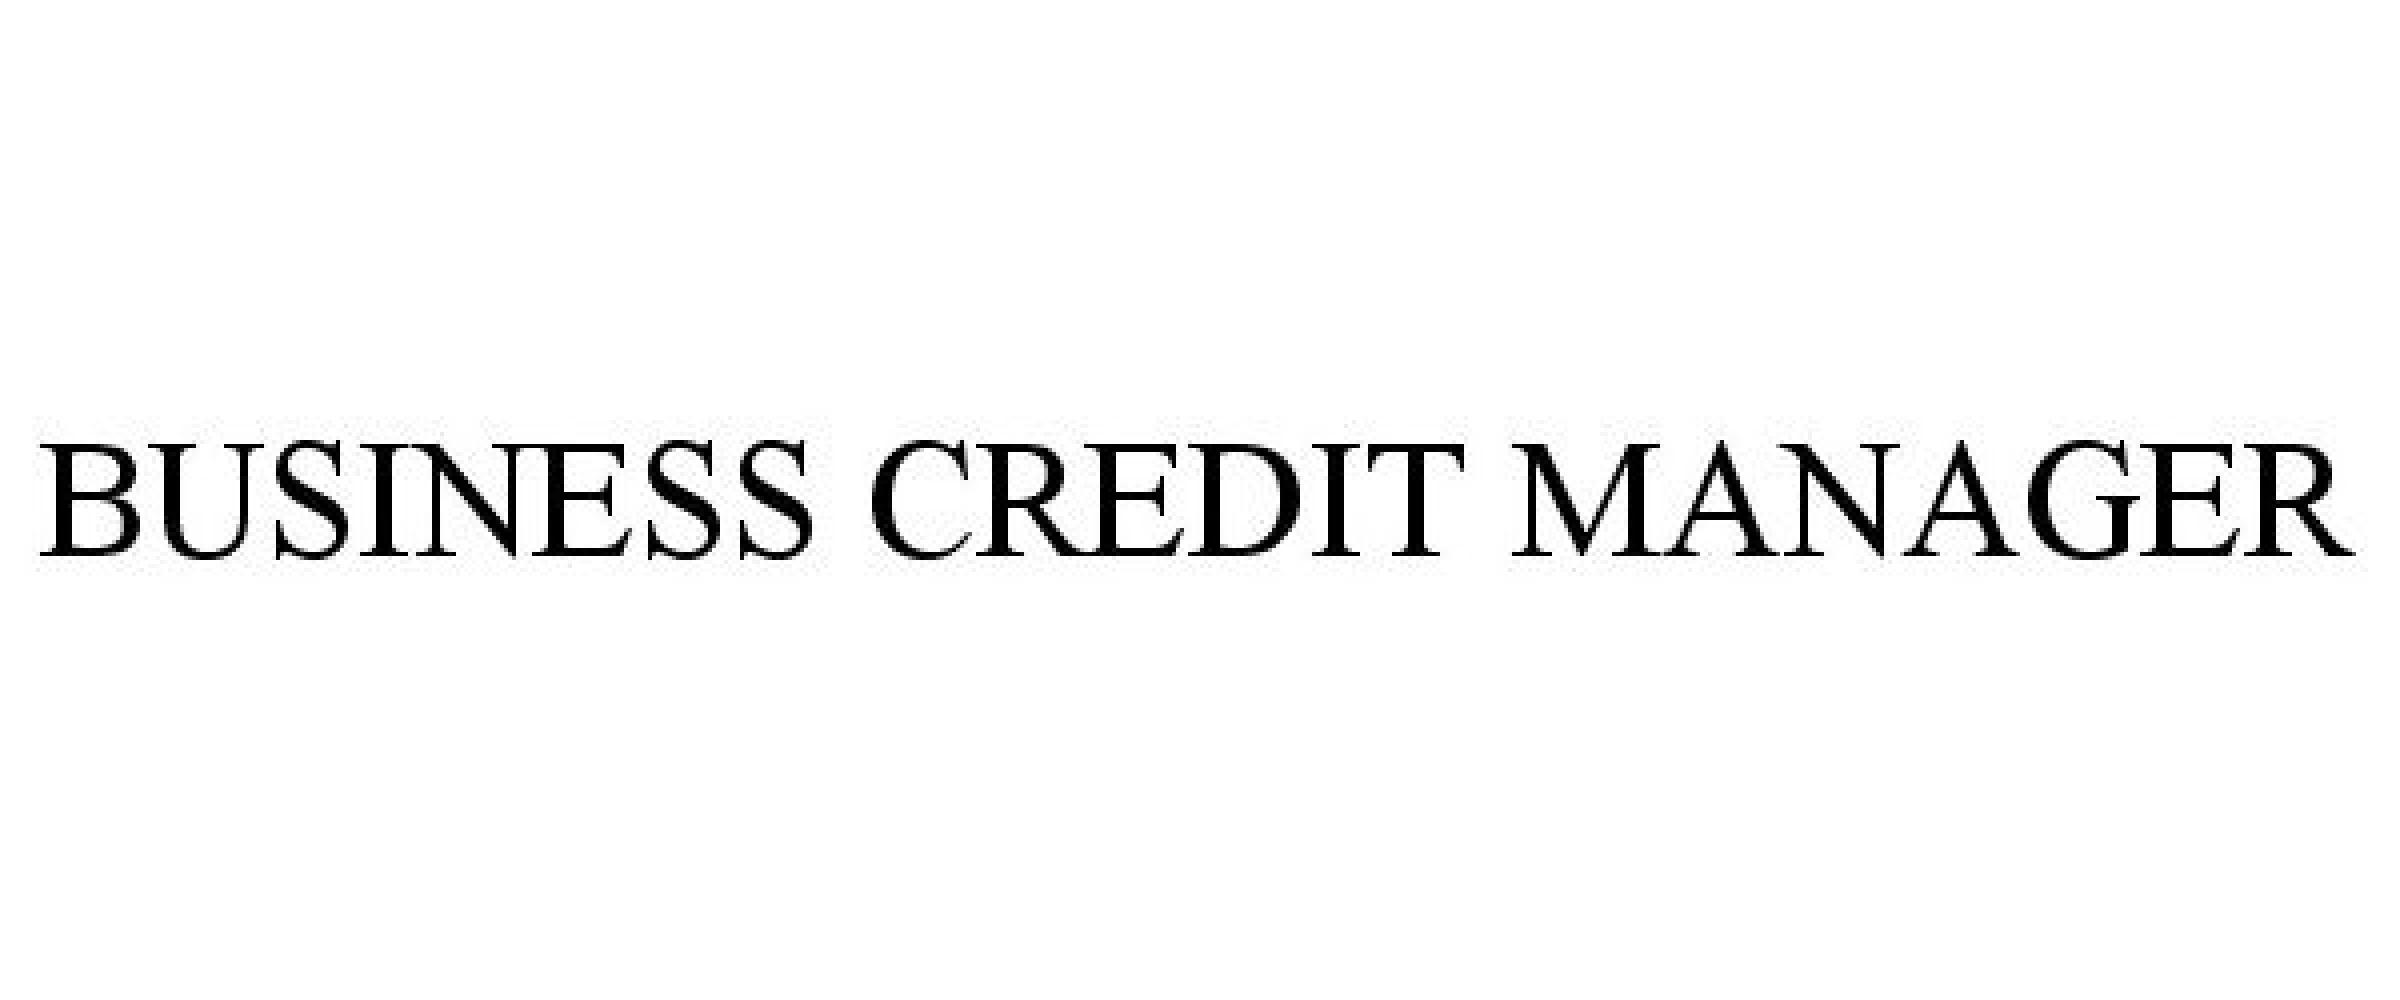  BUSINESS CREDIT MANAGER